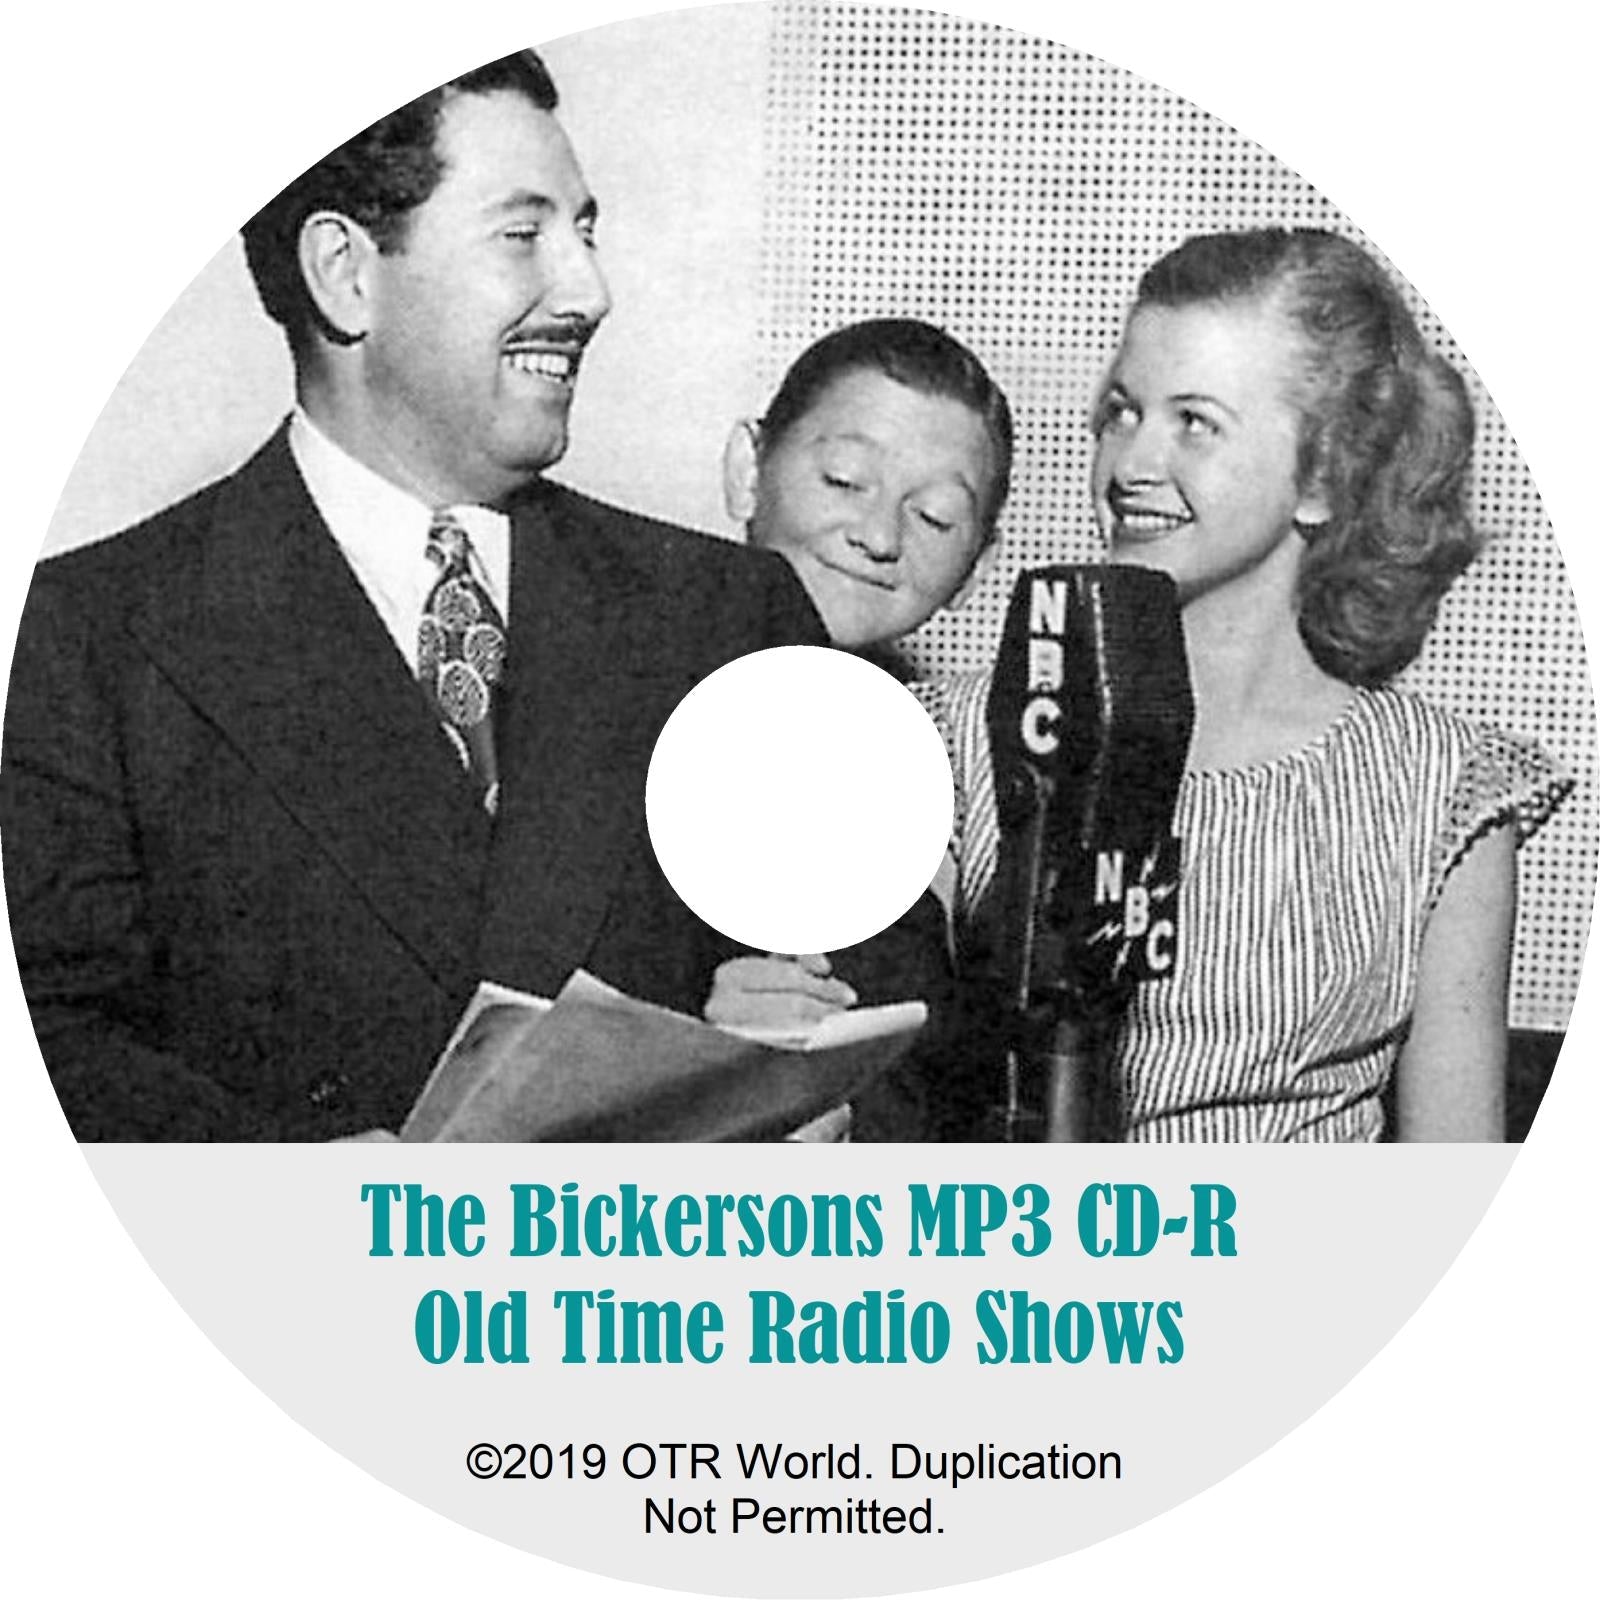 The Bickersons OTR Old Time Radio Show MP3 On CD 55 Episodes